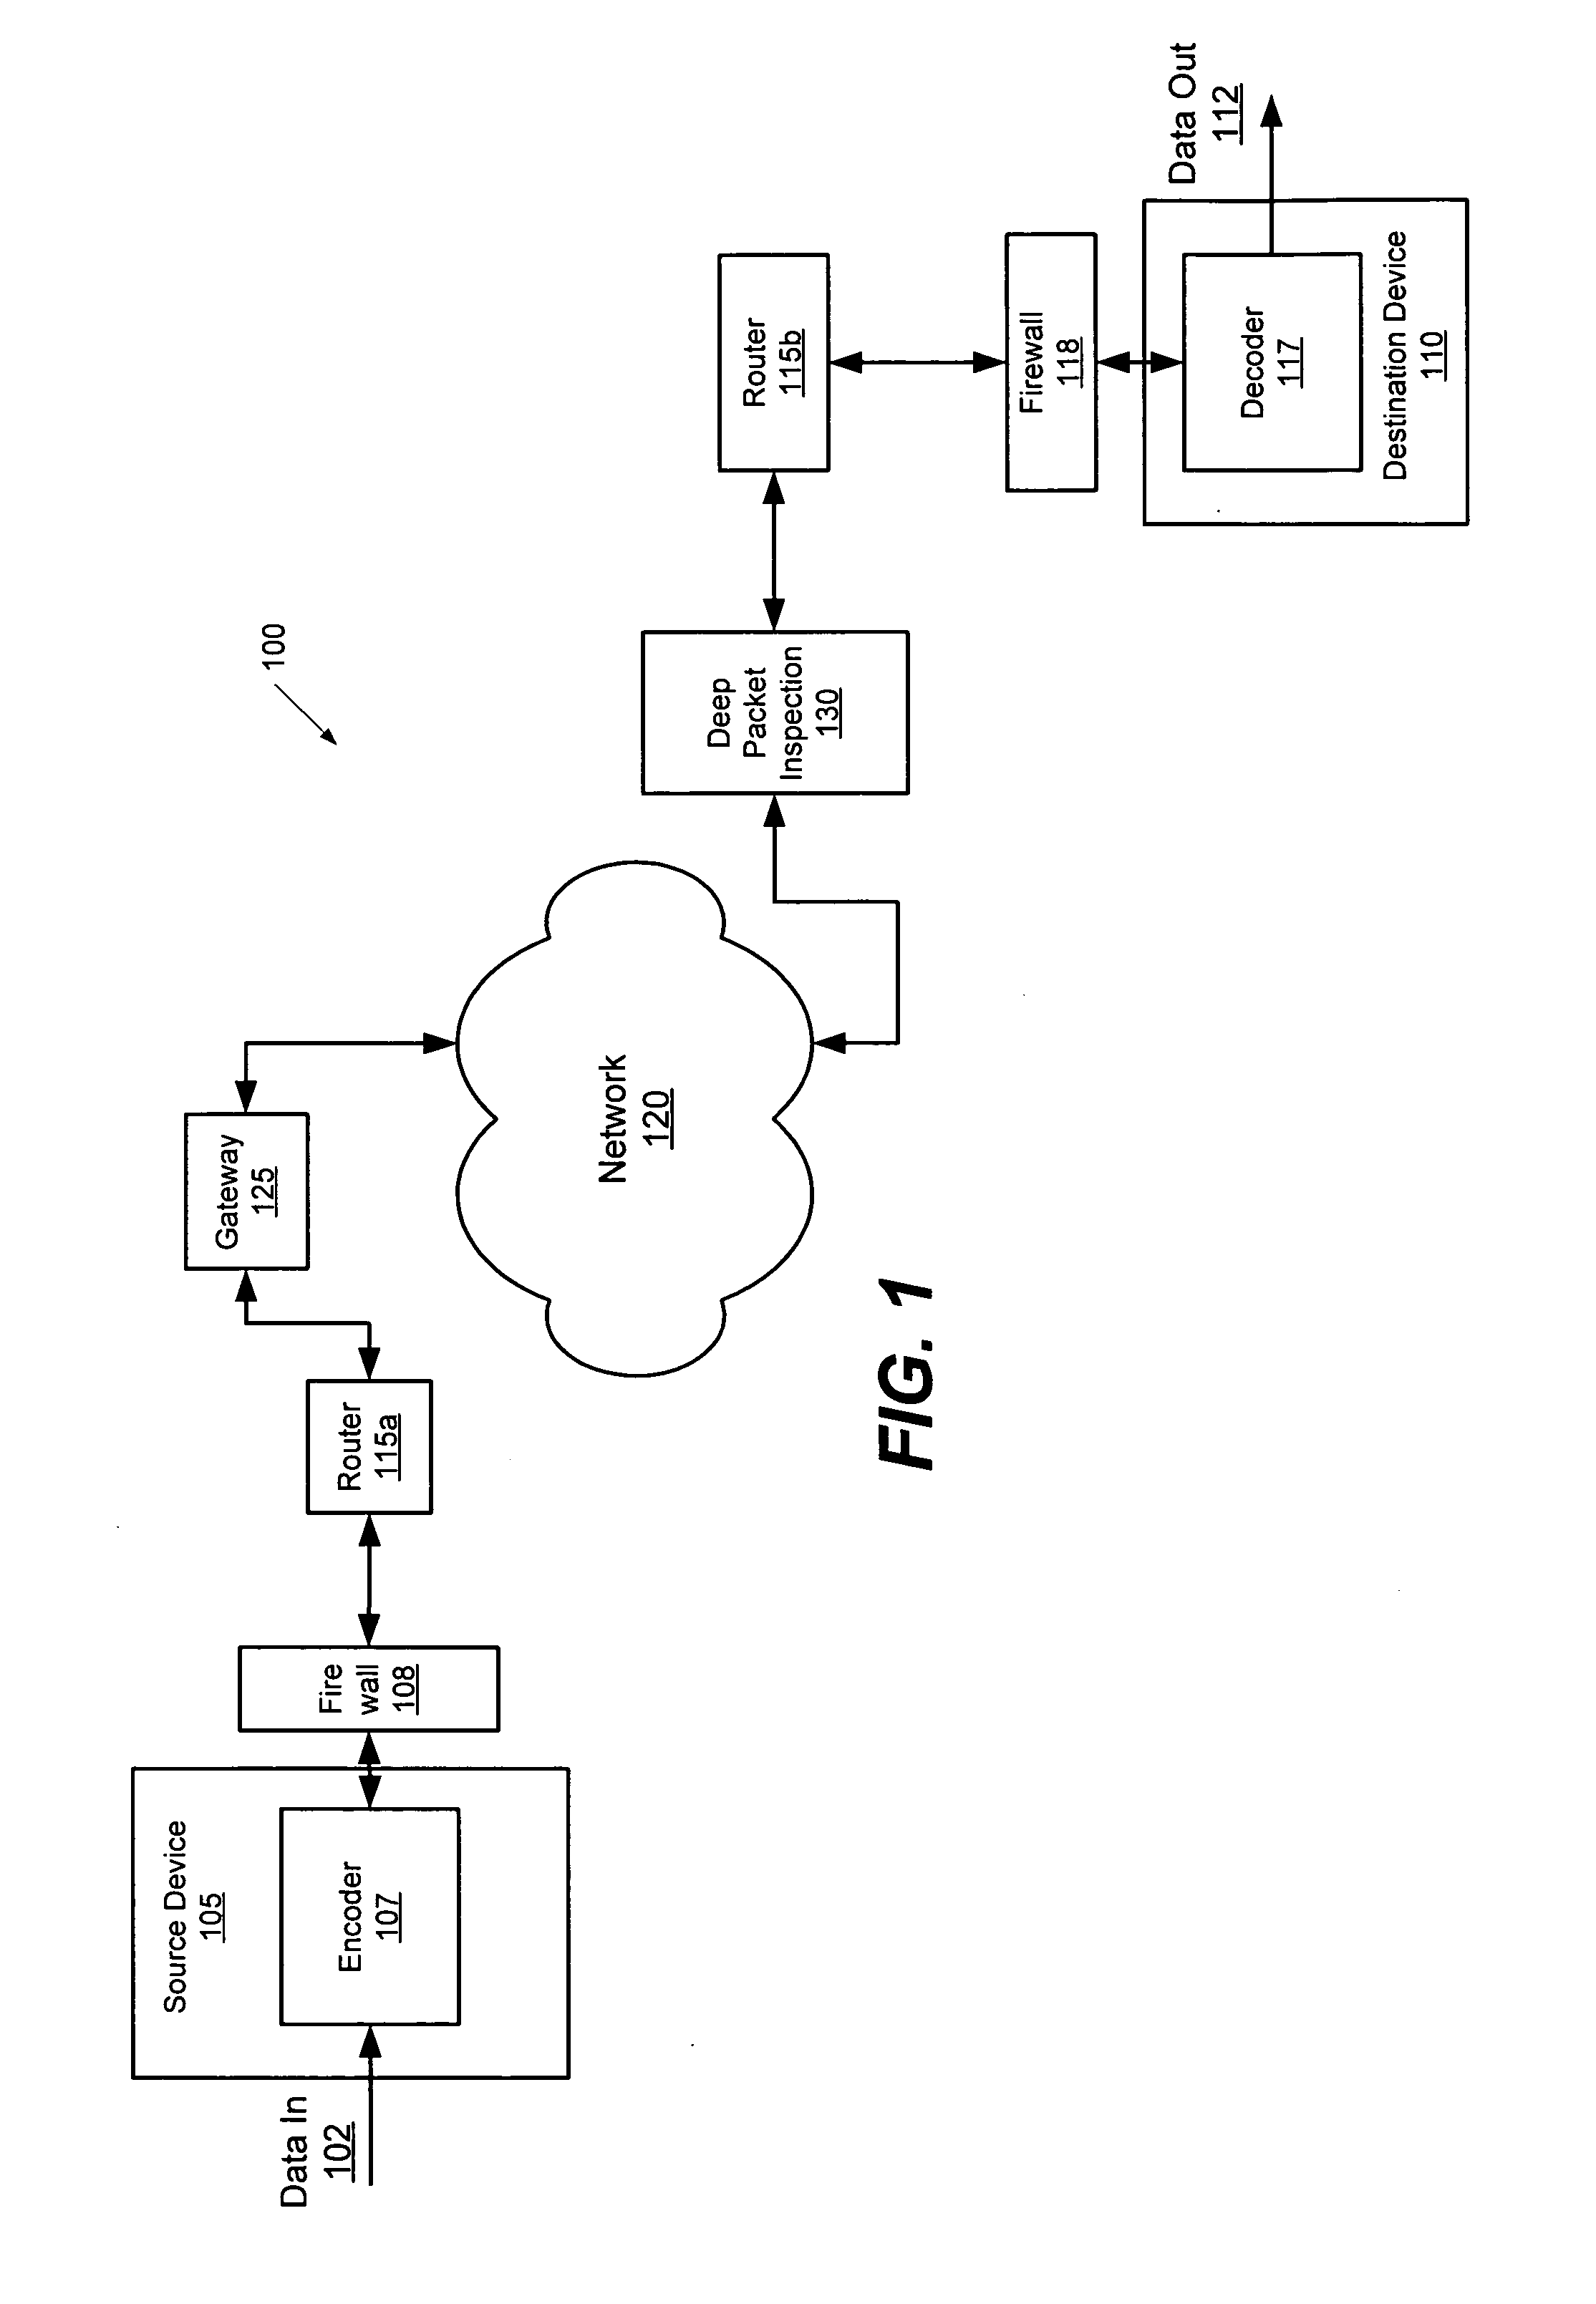 Methods, systems, and computer program products for marking data packets based on content thereof